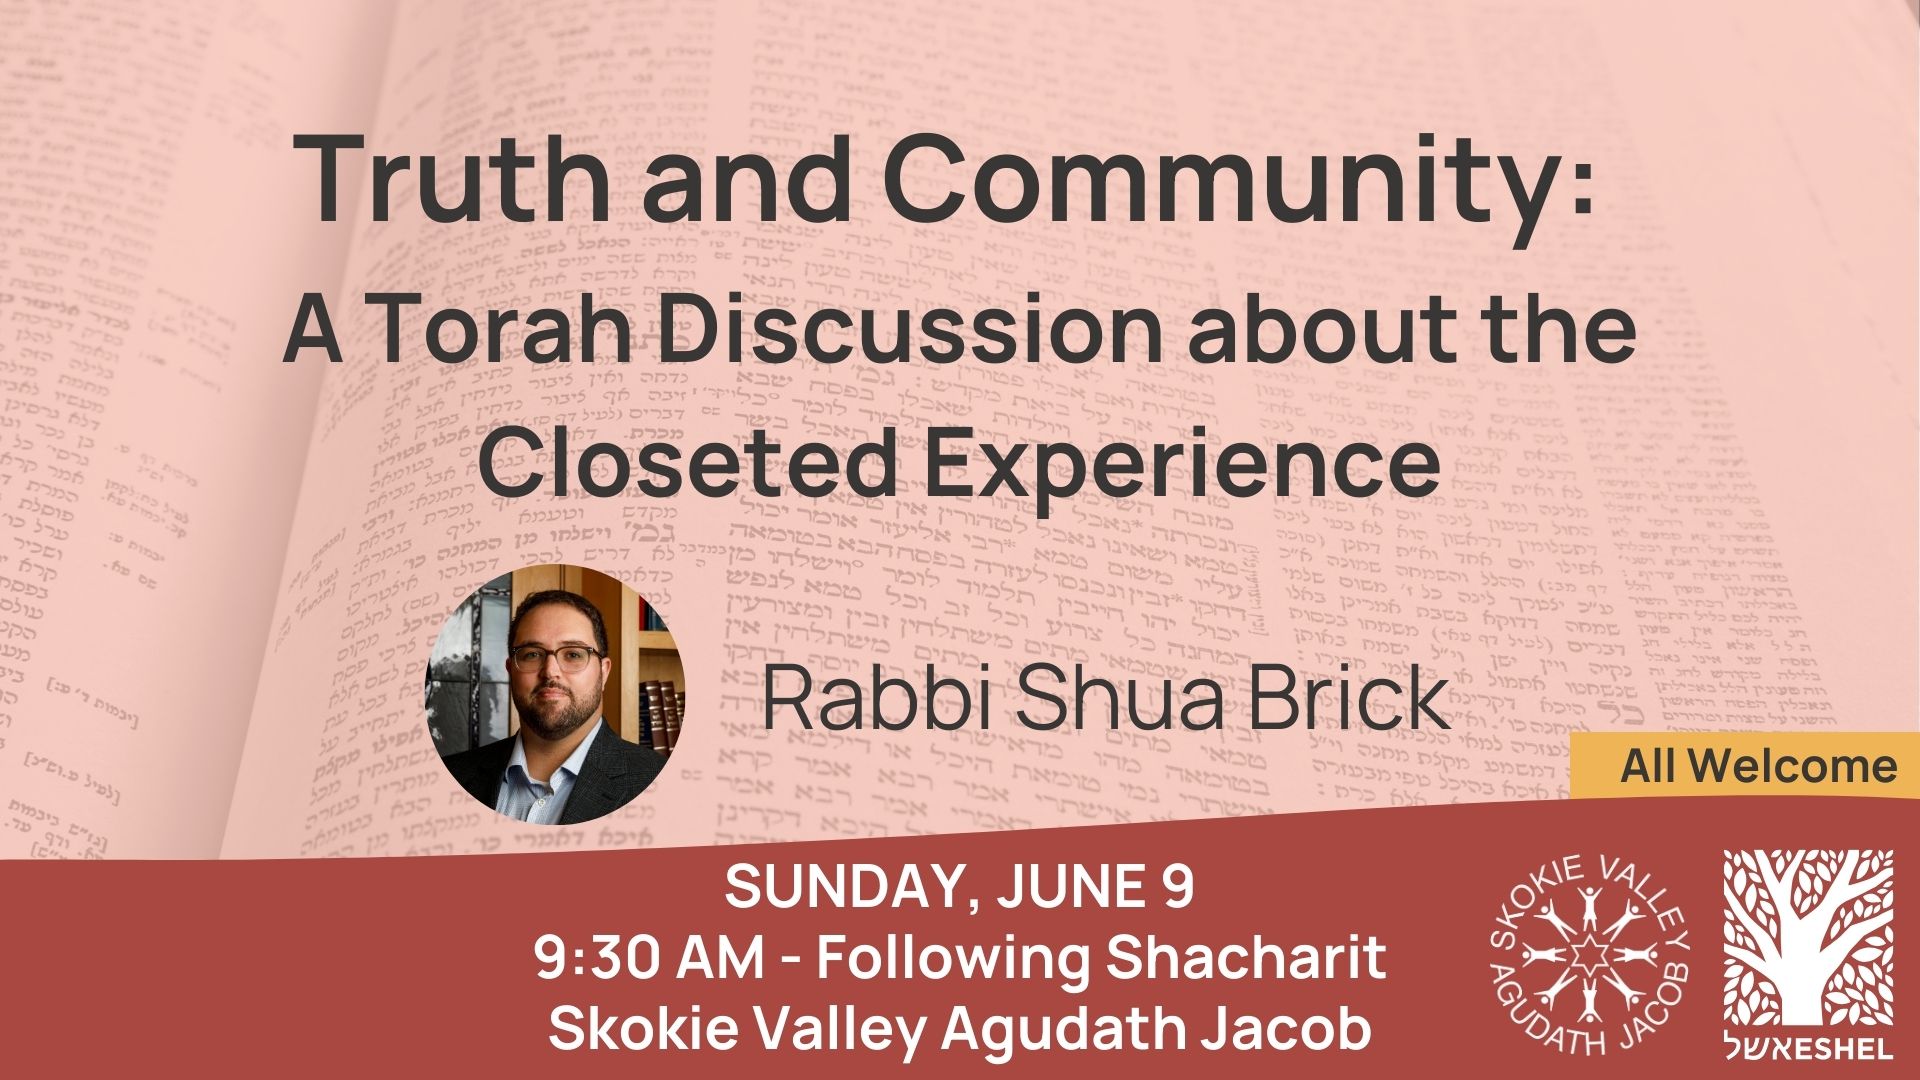 Truth and Community: A Torah Discussion about the Closeted Experience